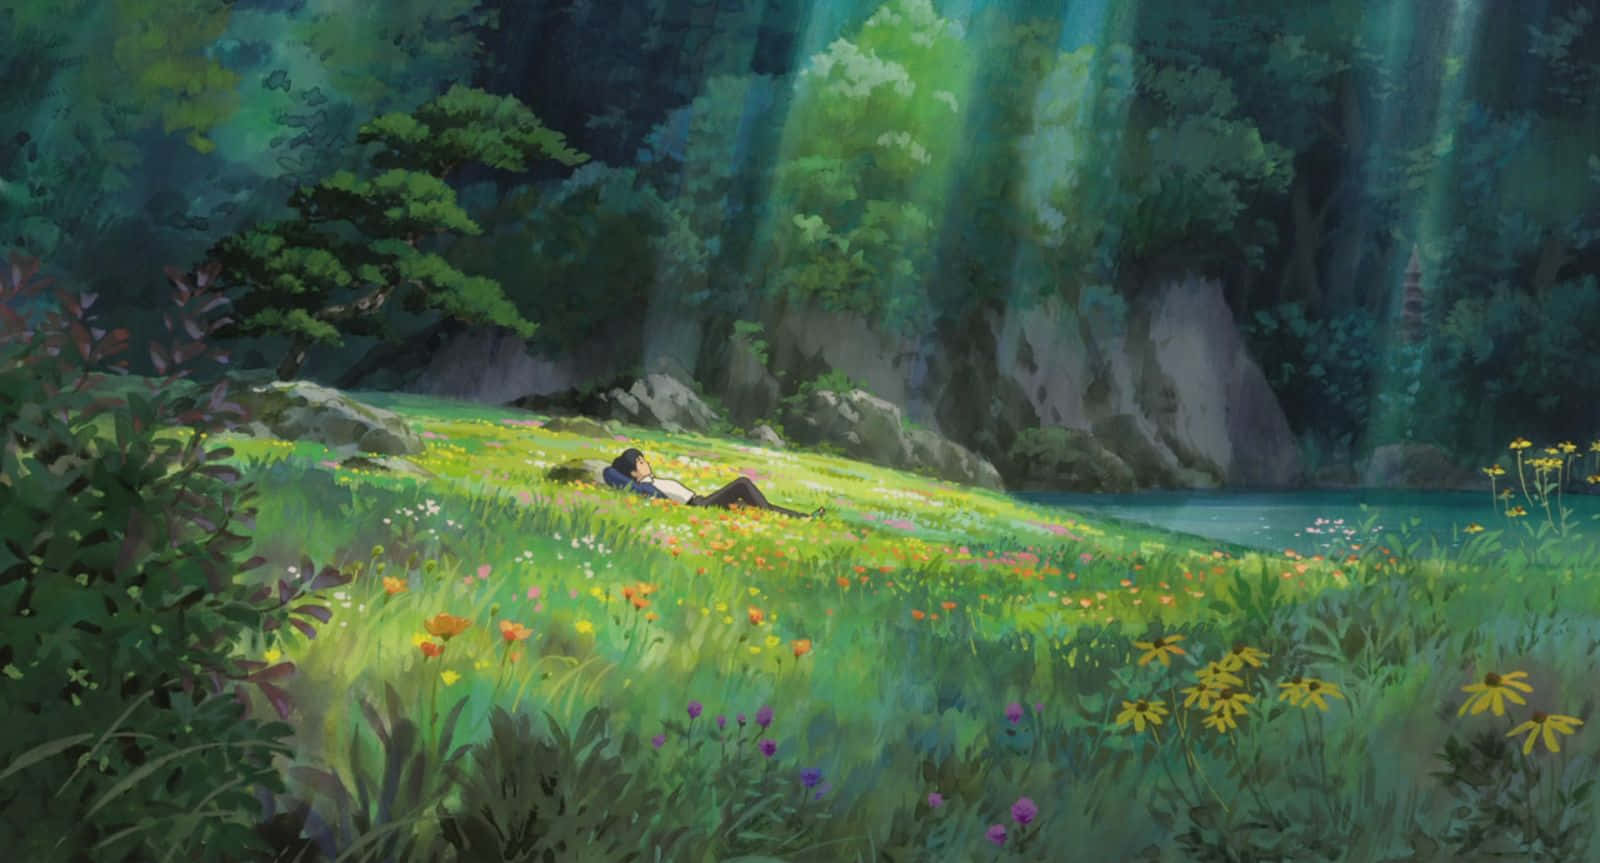 Baggrundenmed Arrietty.